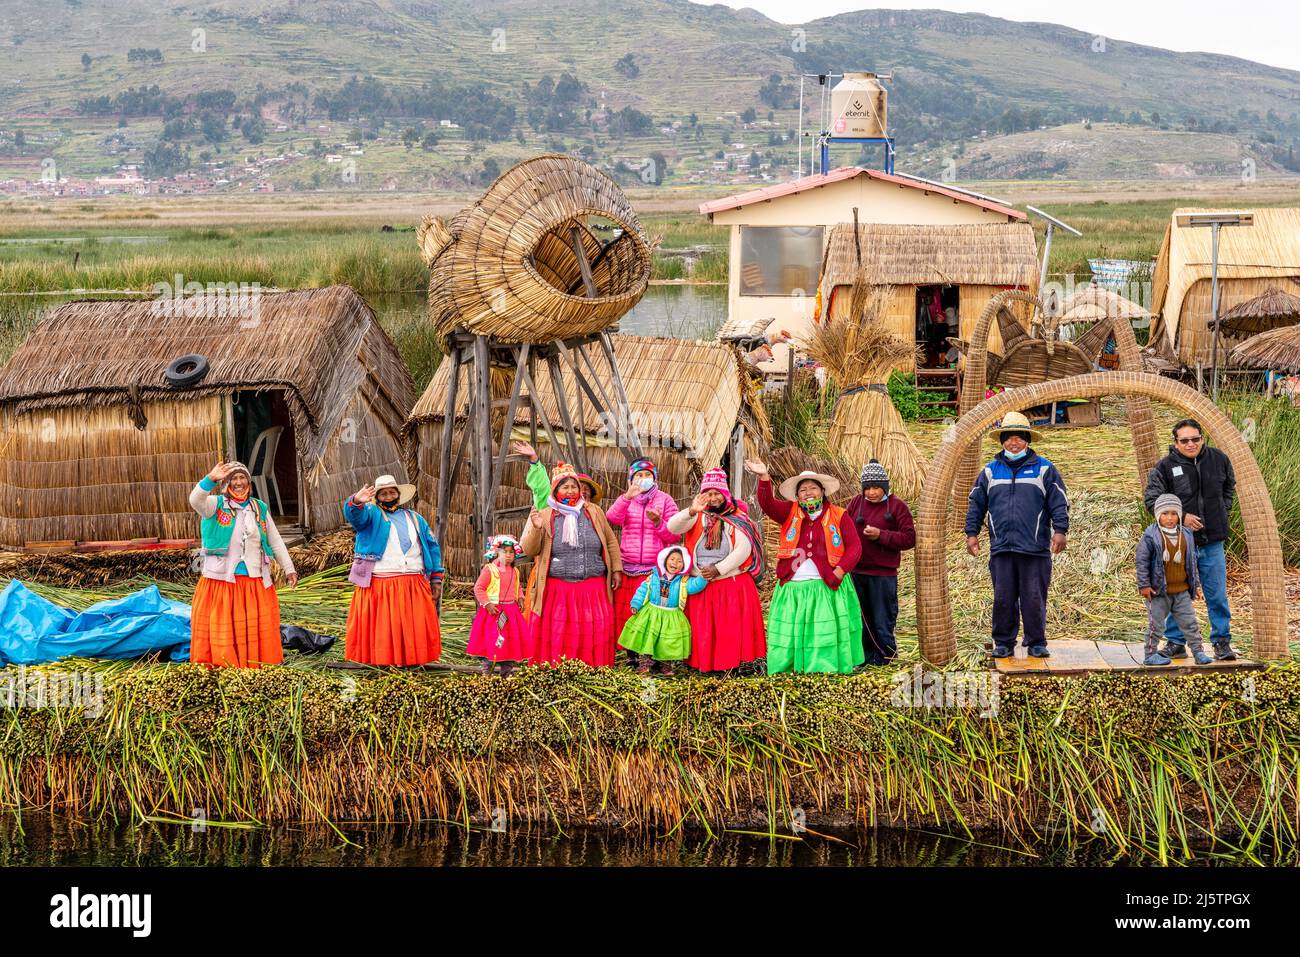 Uros Islanders Waving At A Tourist Boat From The Uros Floating Islands, Lake Titicaca, Puno, Peru. Stock Photo